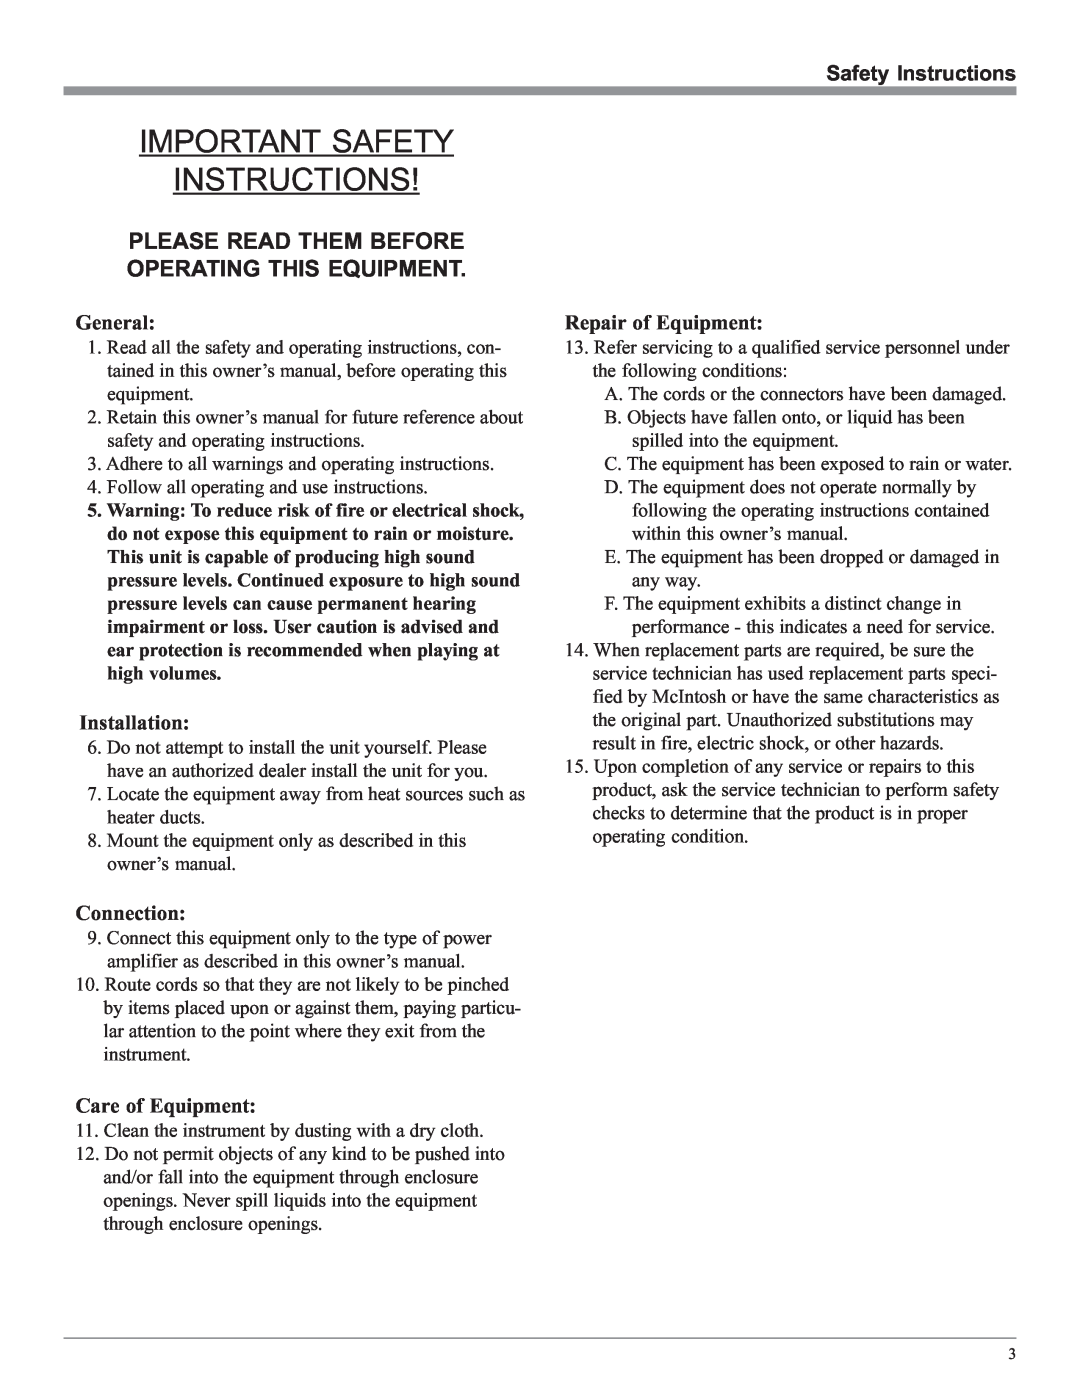 McIntosh MSS530 Important Safety Instructions, Please Read Them Before Operating This Equipment, General, Installation 